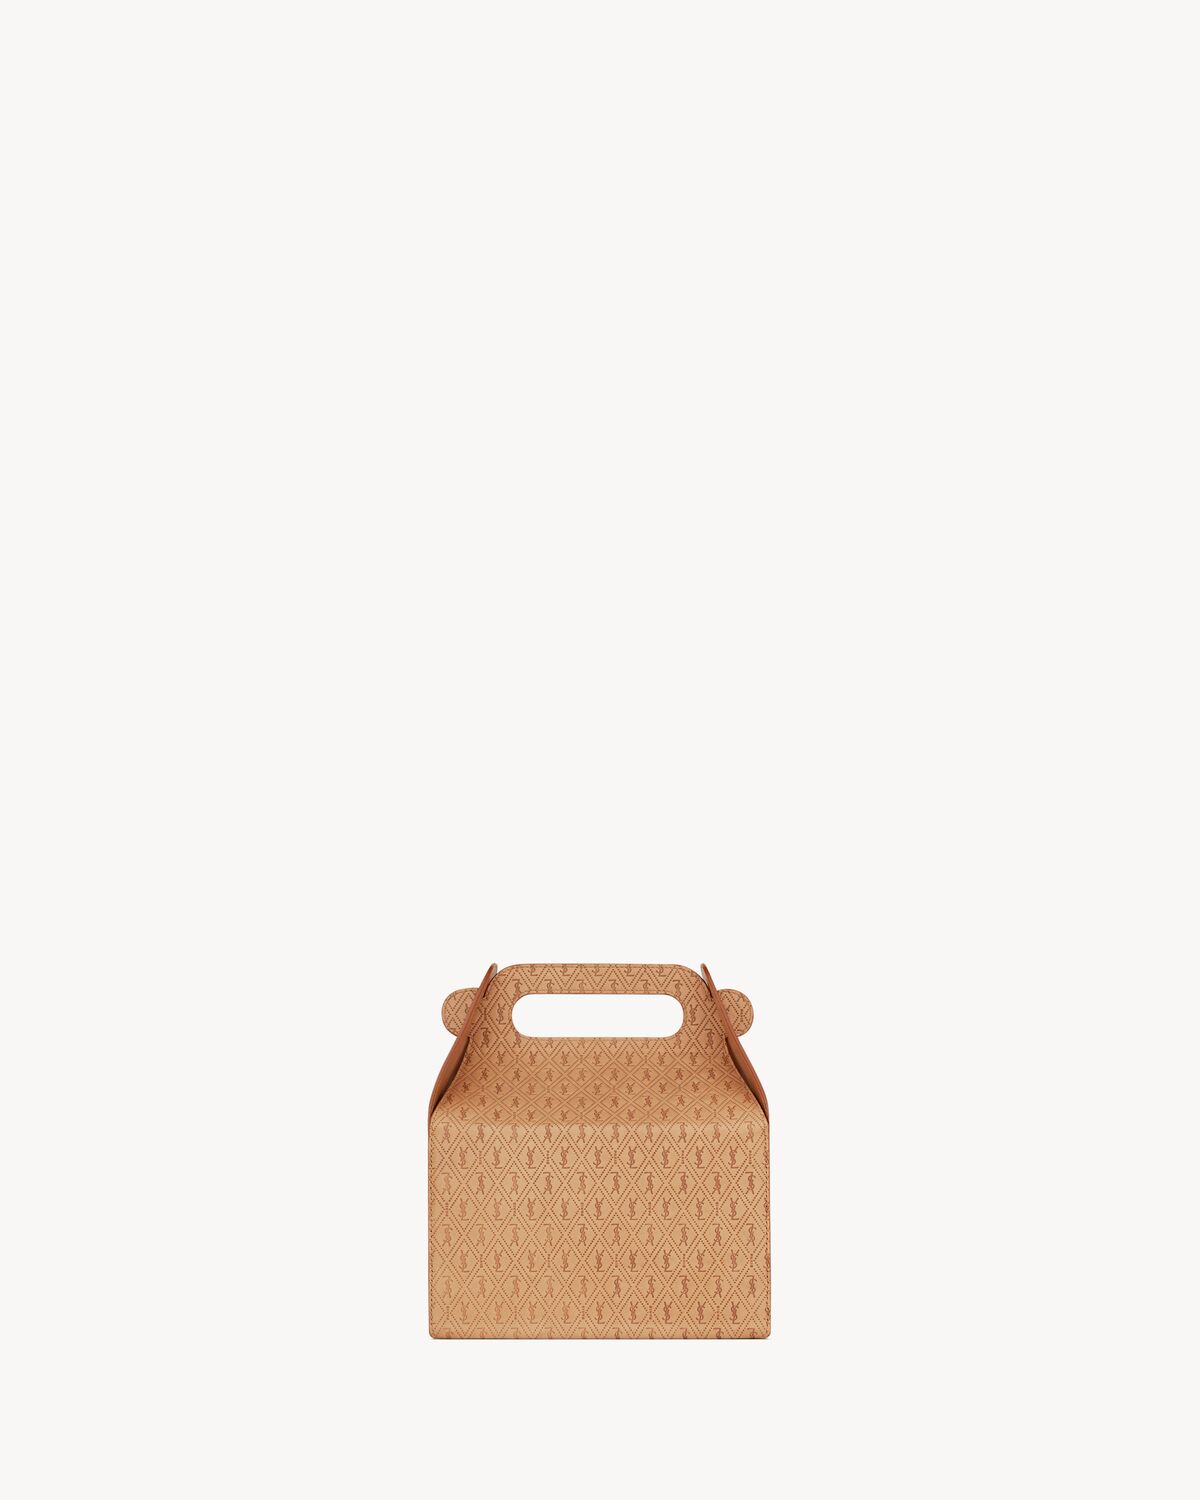 TAKE-AWAY BOX IN VEGETABLE-TANNED LEATHER